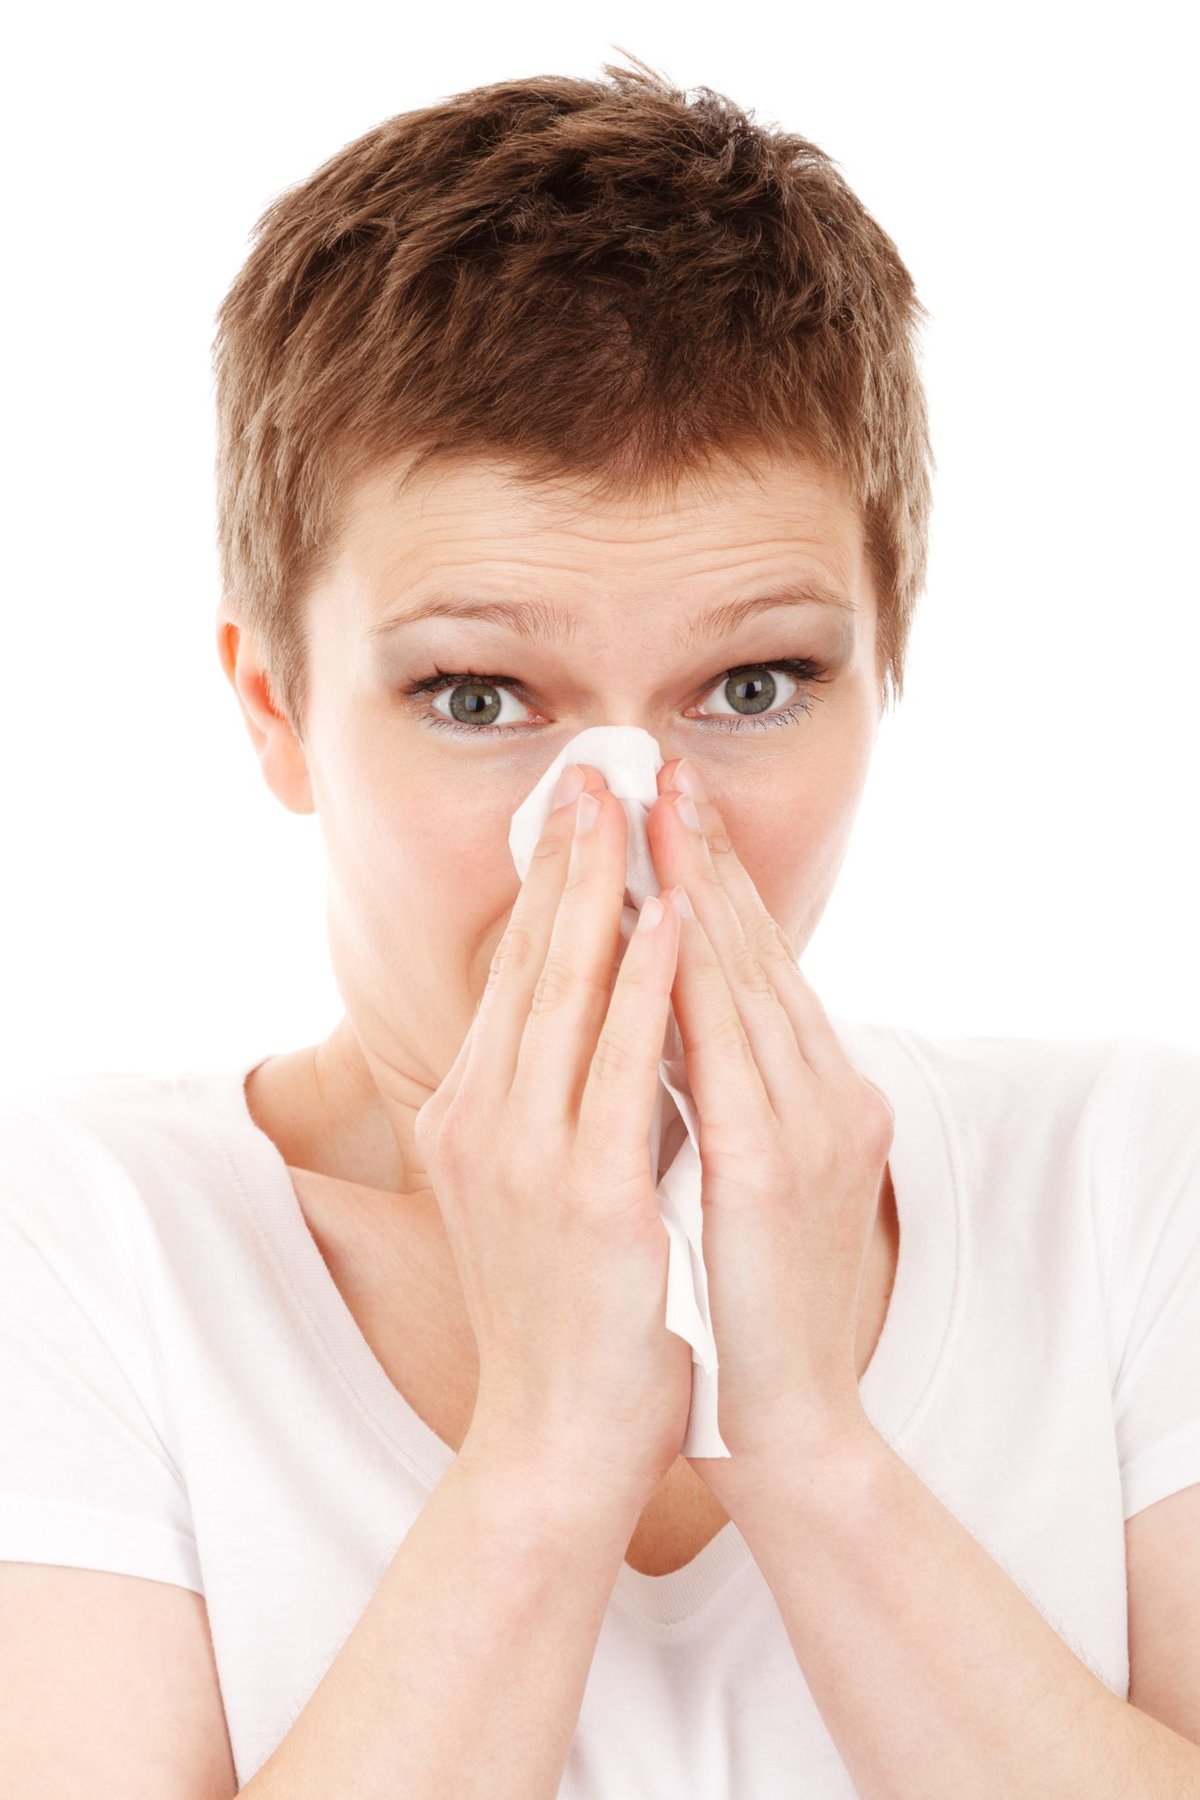 Will probiotics and prebiotics have a role in treating allergies in the future?